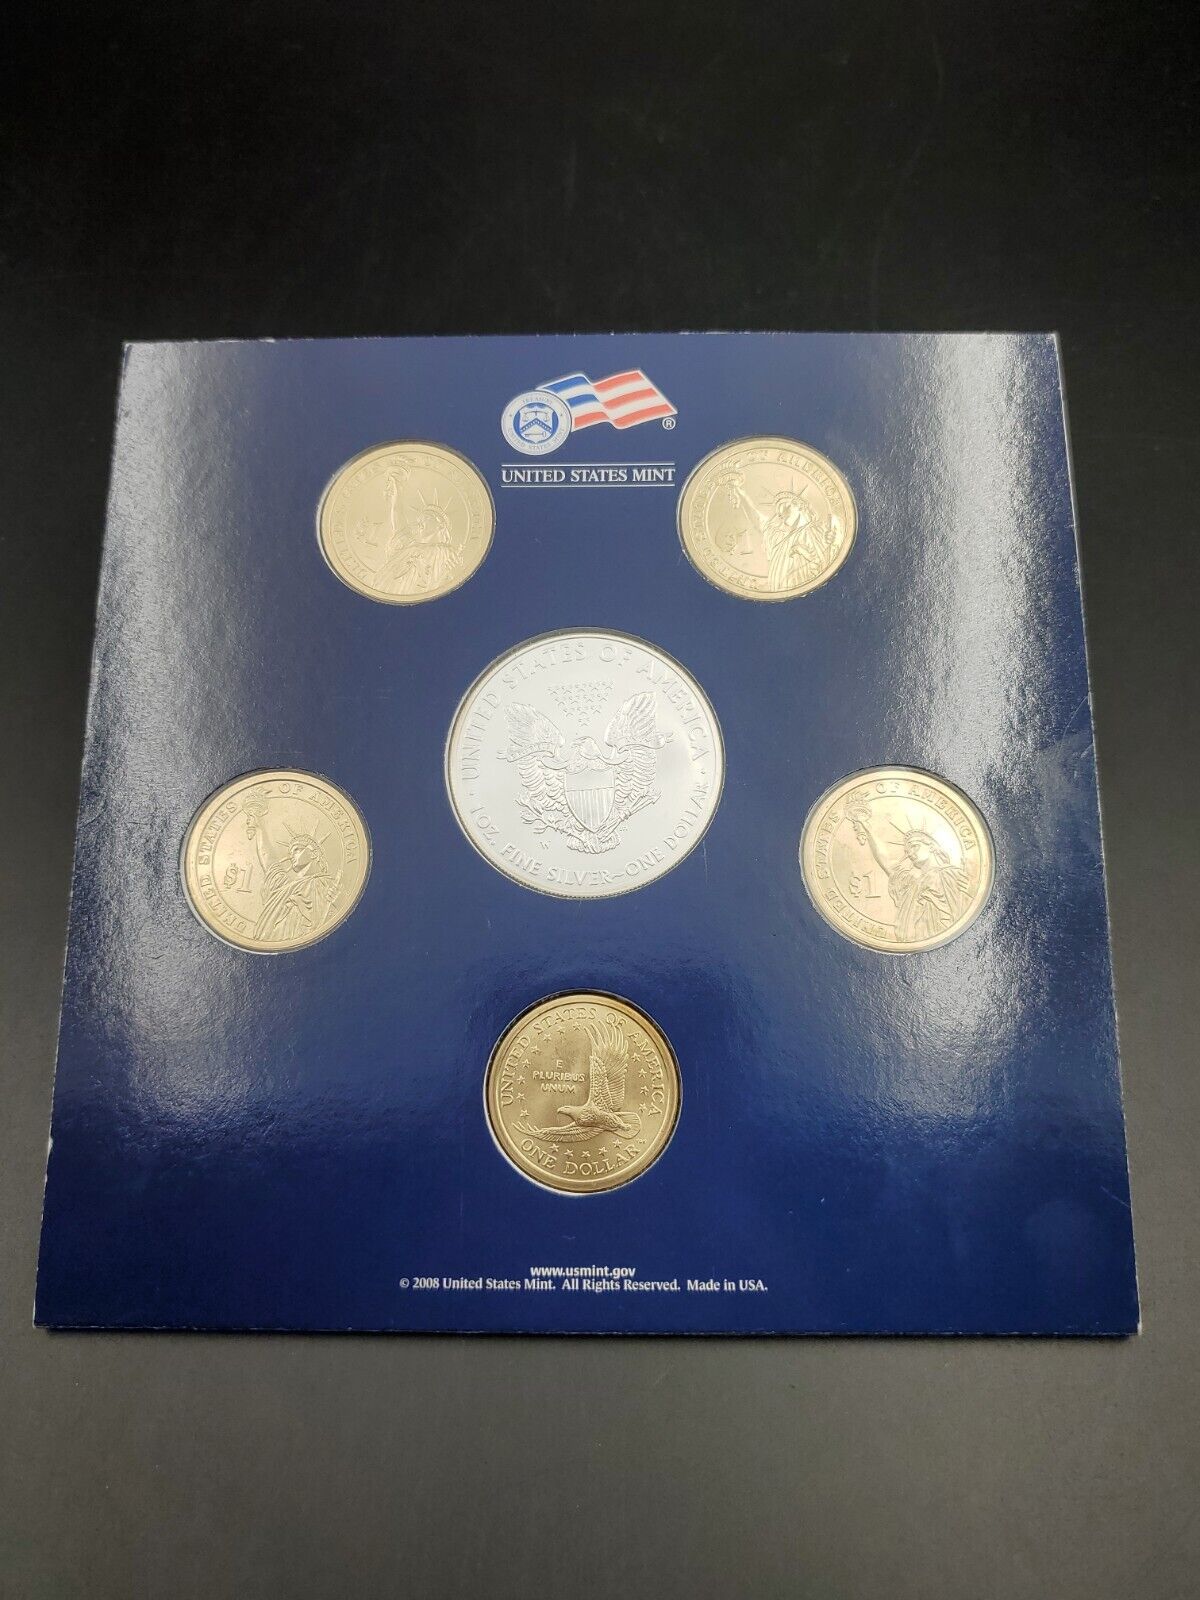 2008 Annual United States Uncirculated Dollar Coin Set w/ silver eagle